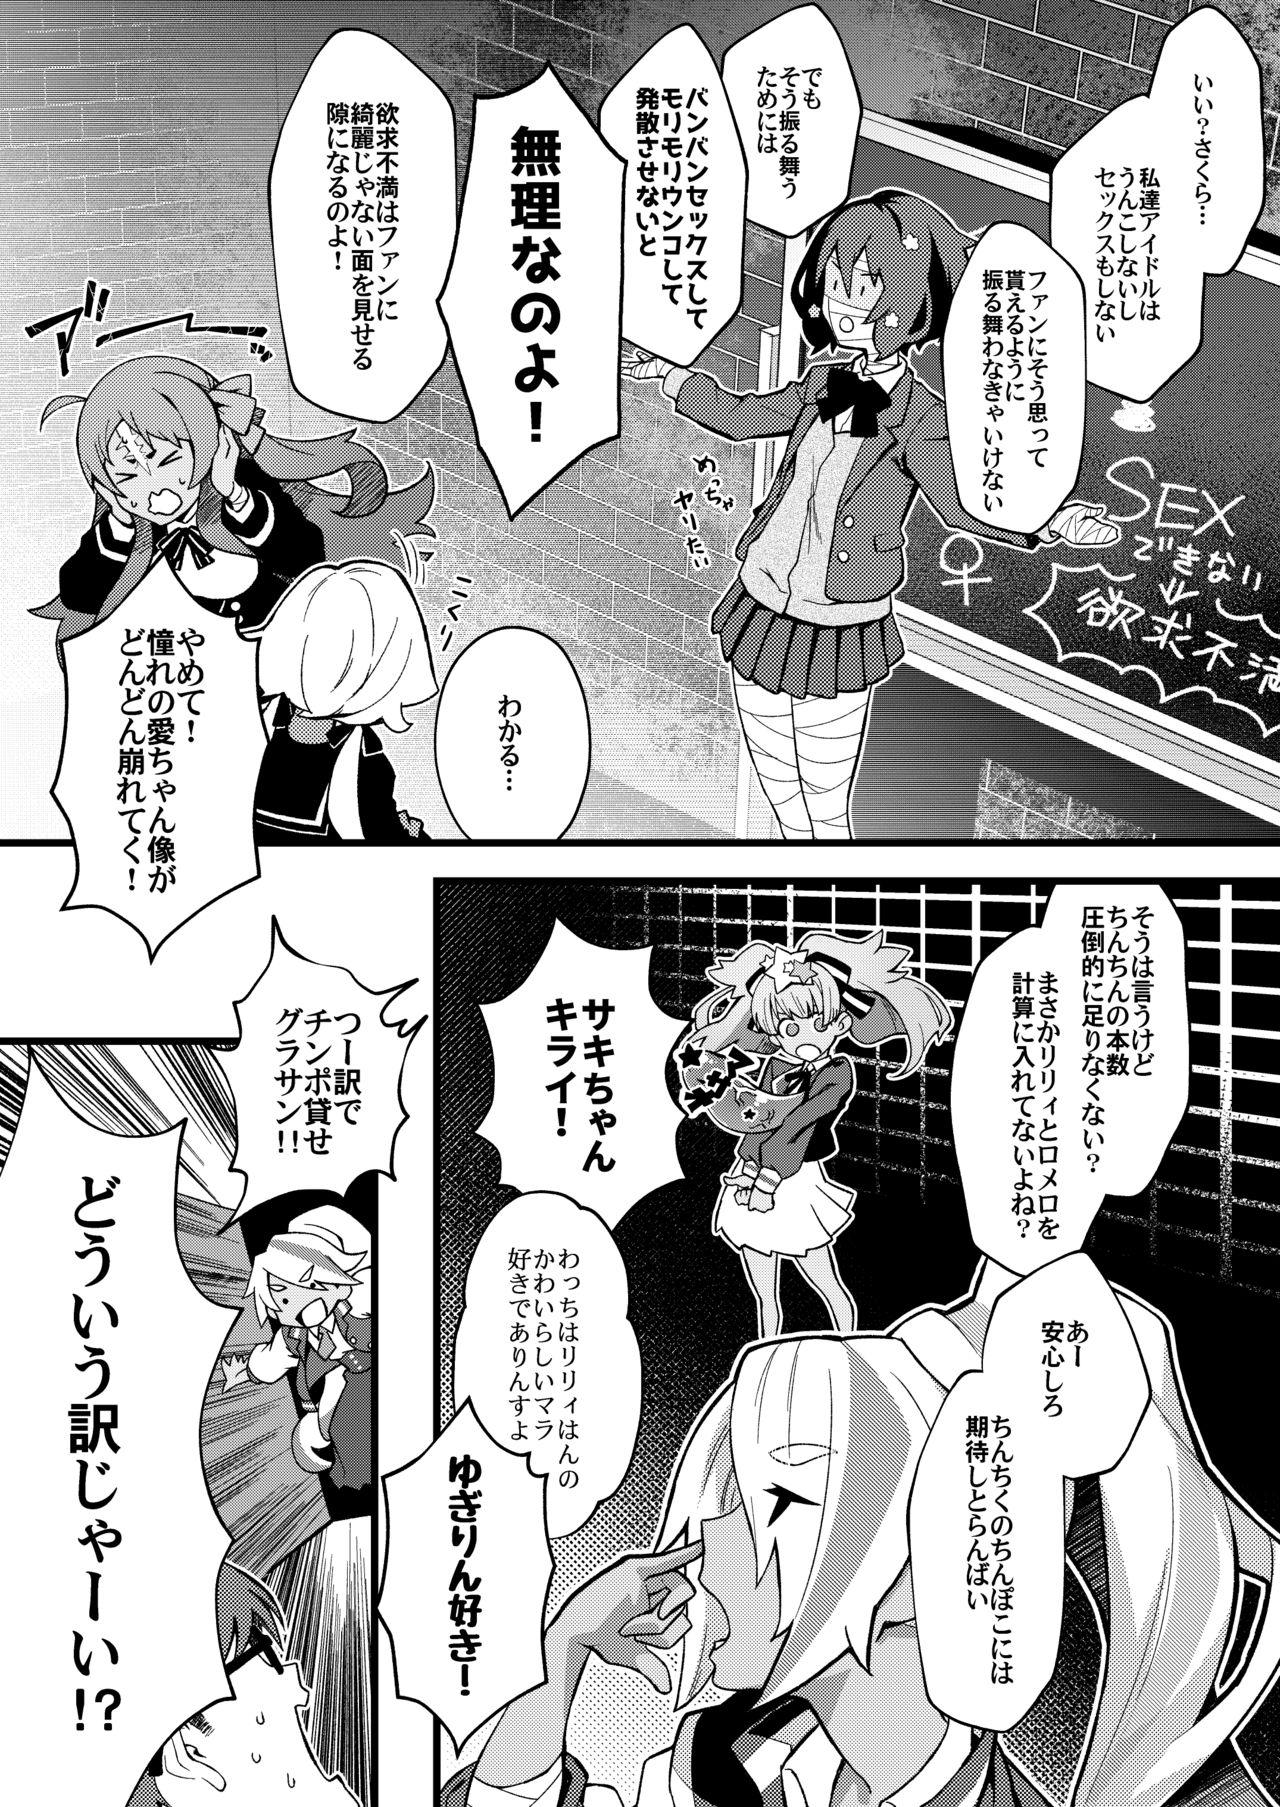 Stepfather zombie and sex - Zombie land saga Clit - Page 4